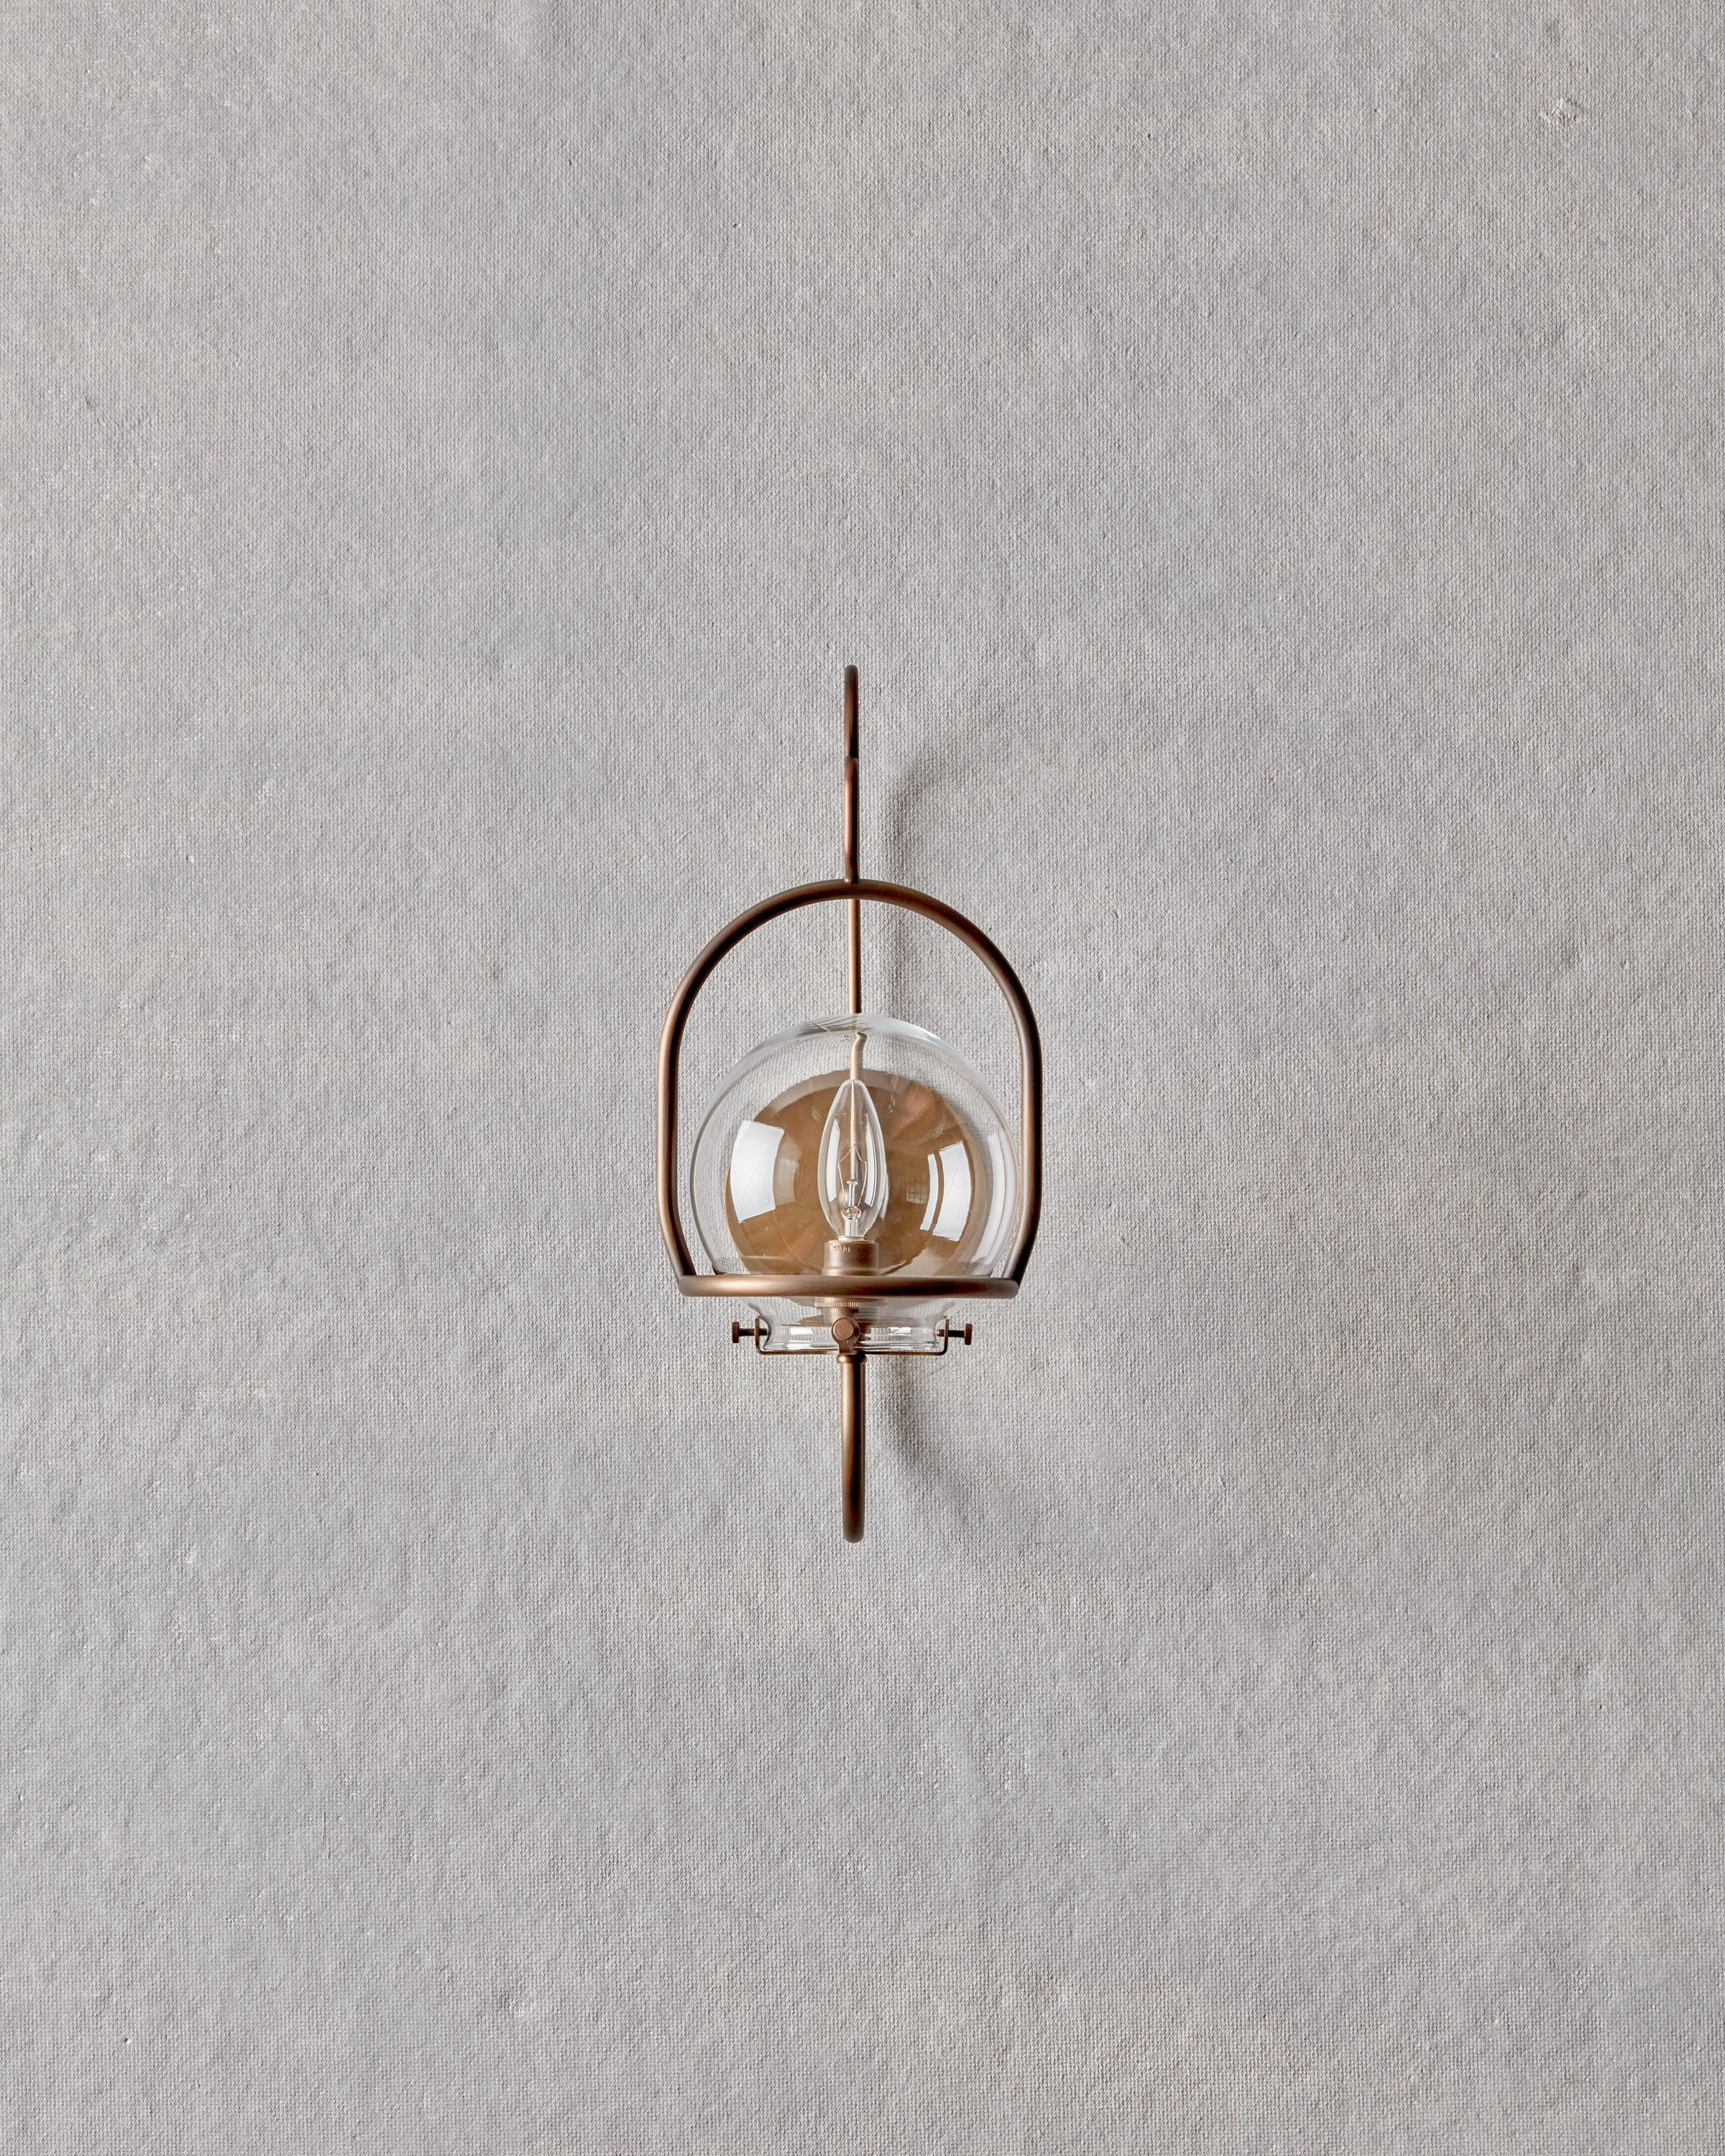 The scaled-down version of our Emil Wall Lantern provides versatility both indoors and out. Clean bent brass lines update this classic lantern with a nod to tradition.

OVERALL DIMENSIONS
7.25